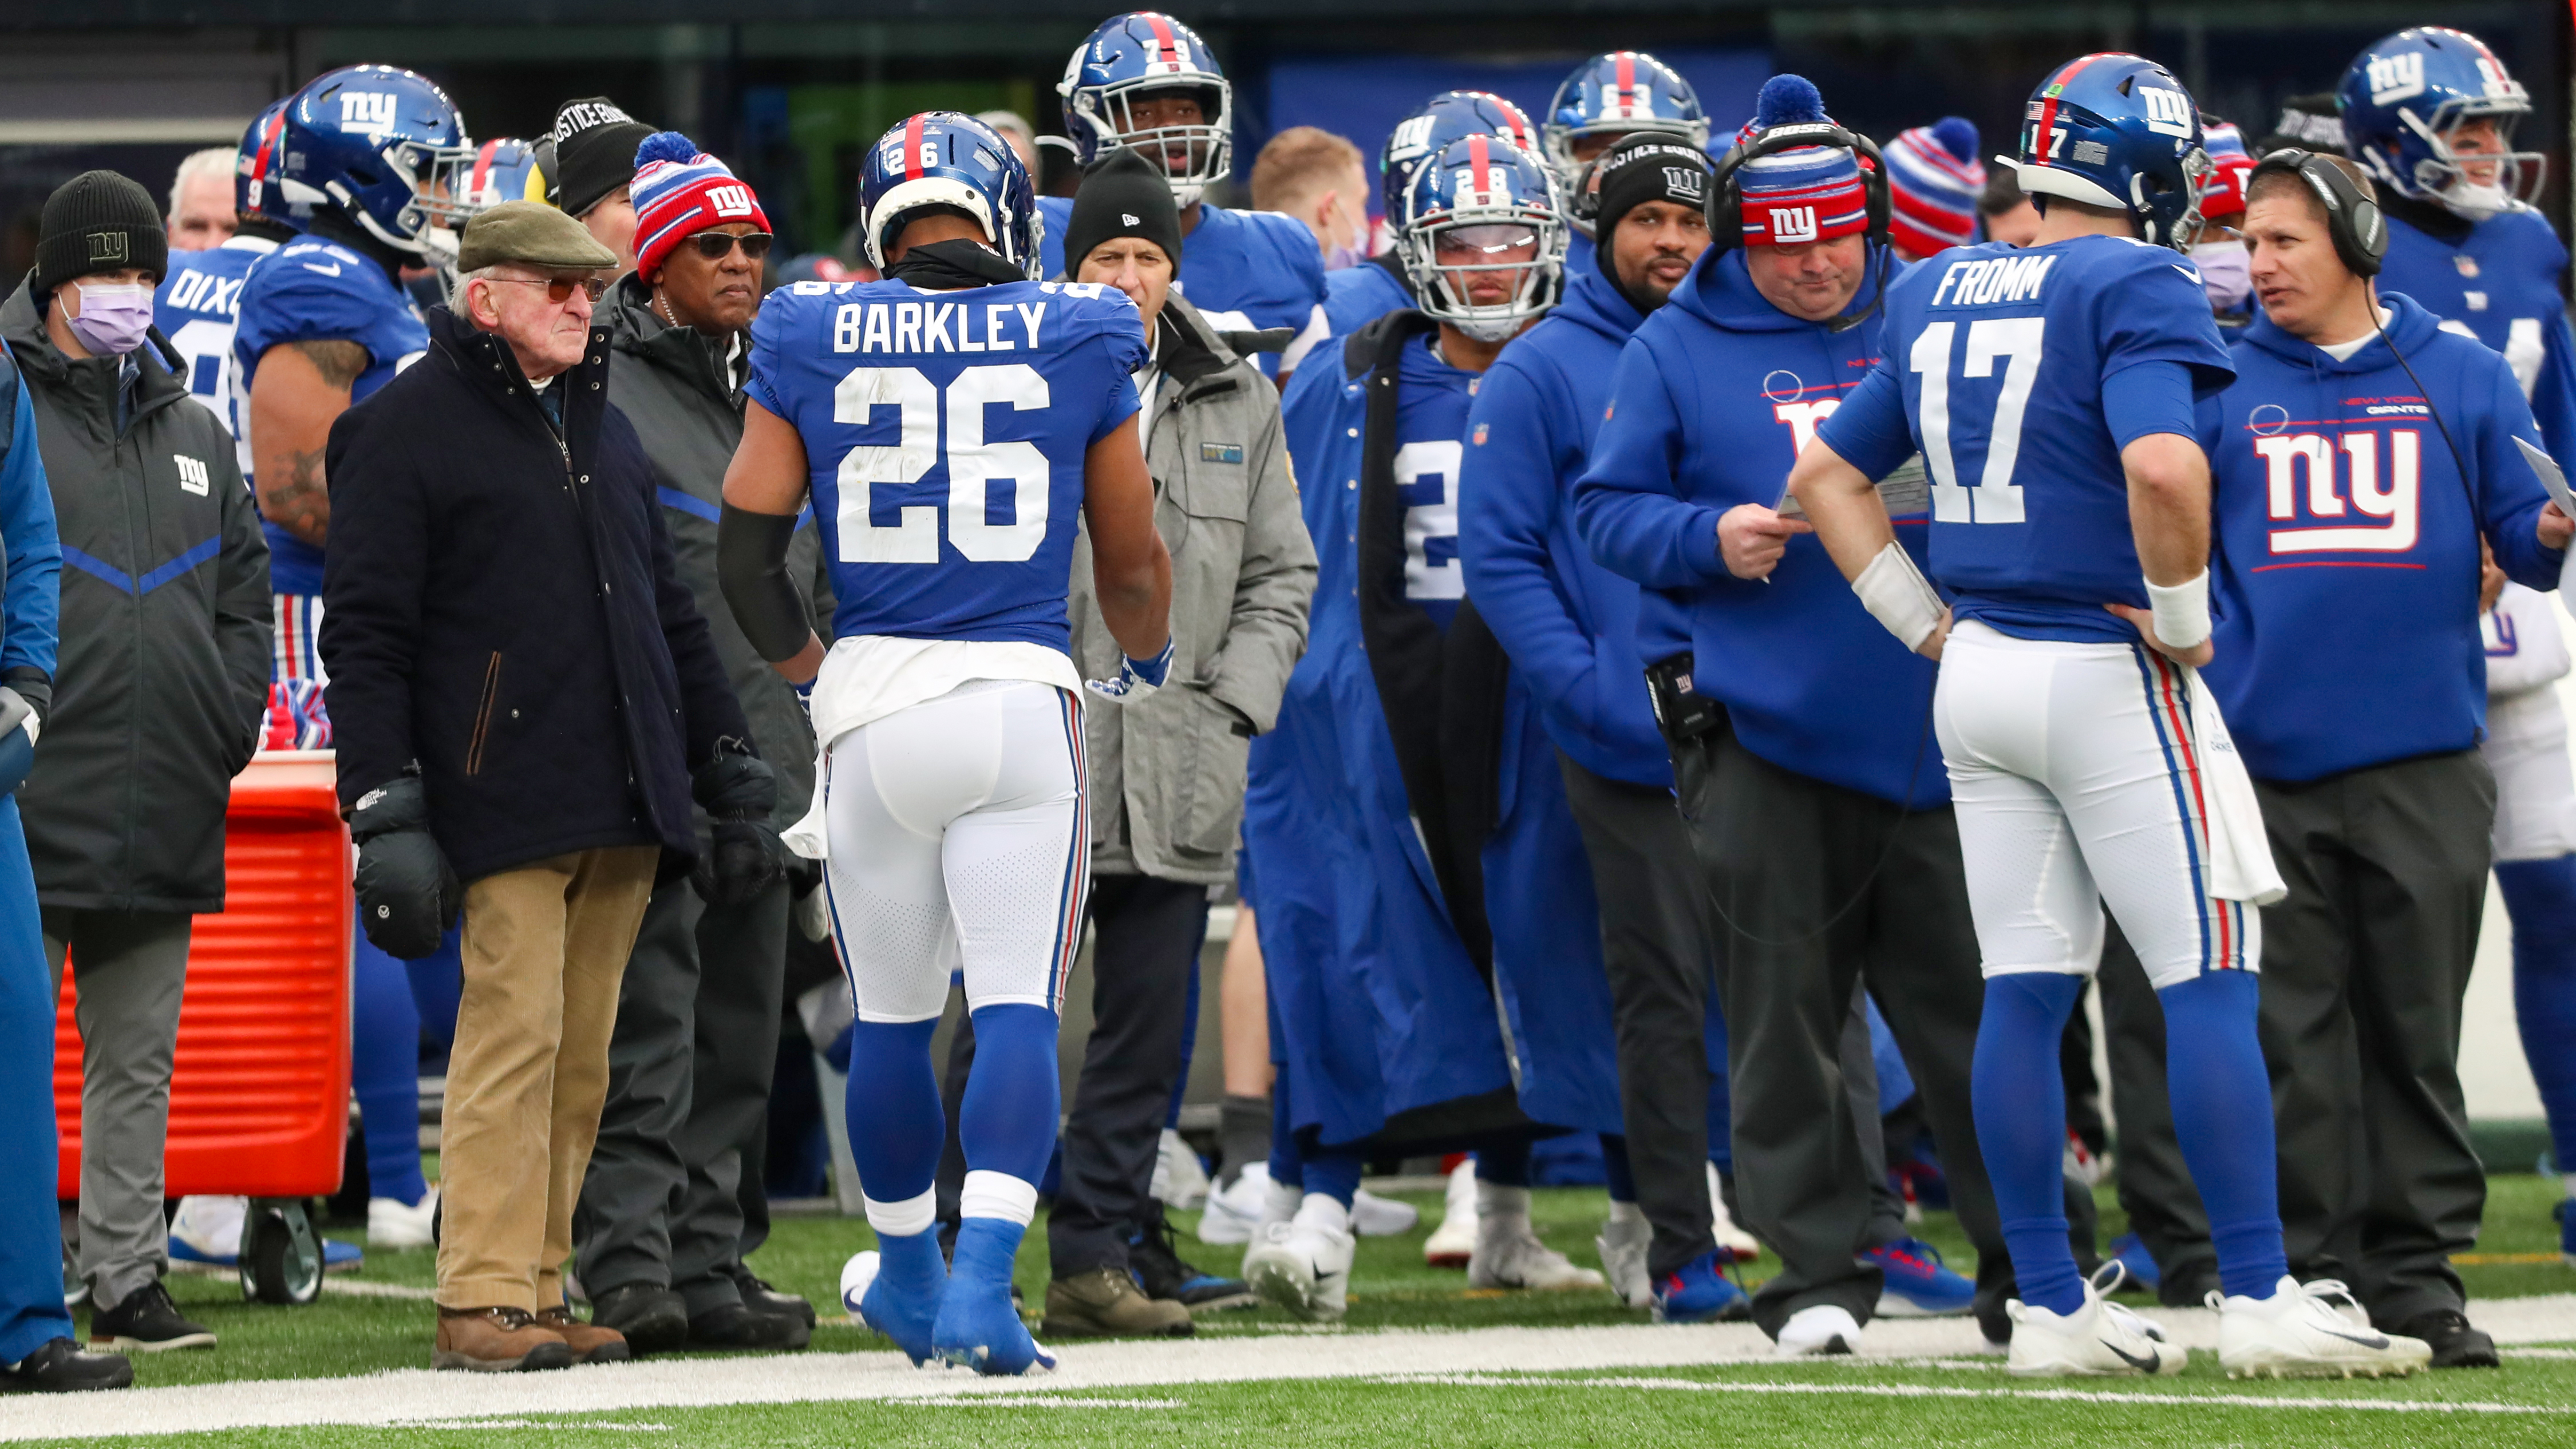 New York Giants running back Saquon Barkley (26) walks off the field at the 2-minute warning of the second quarter on Sunday, Jan. 9, 2022 in East Rutherford, N.J.